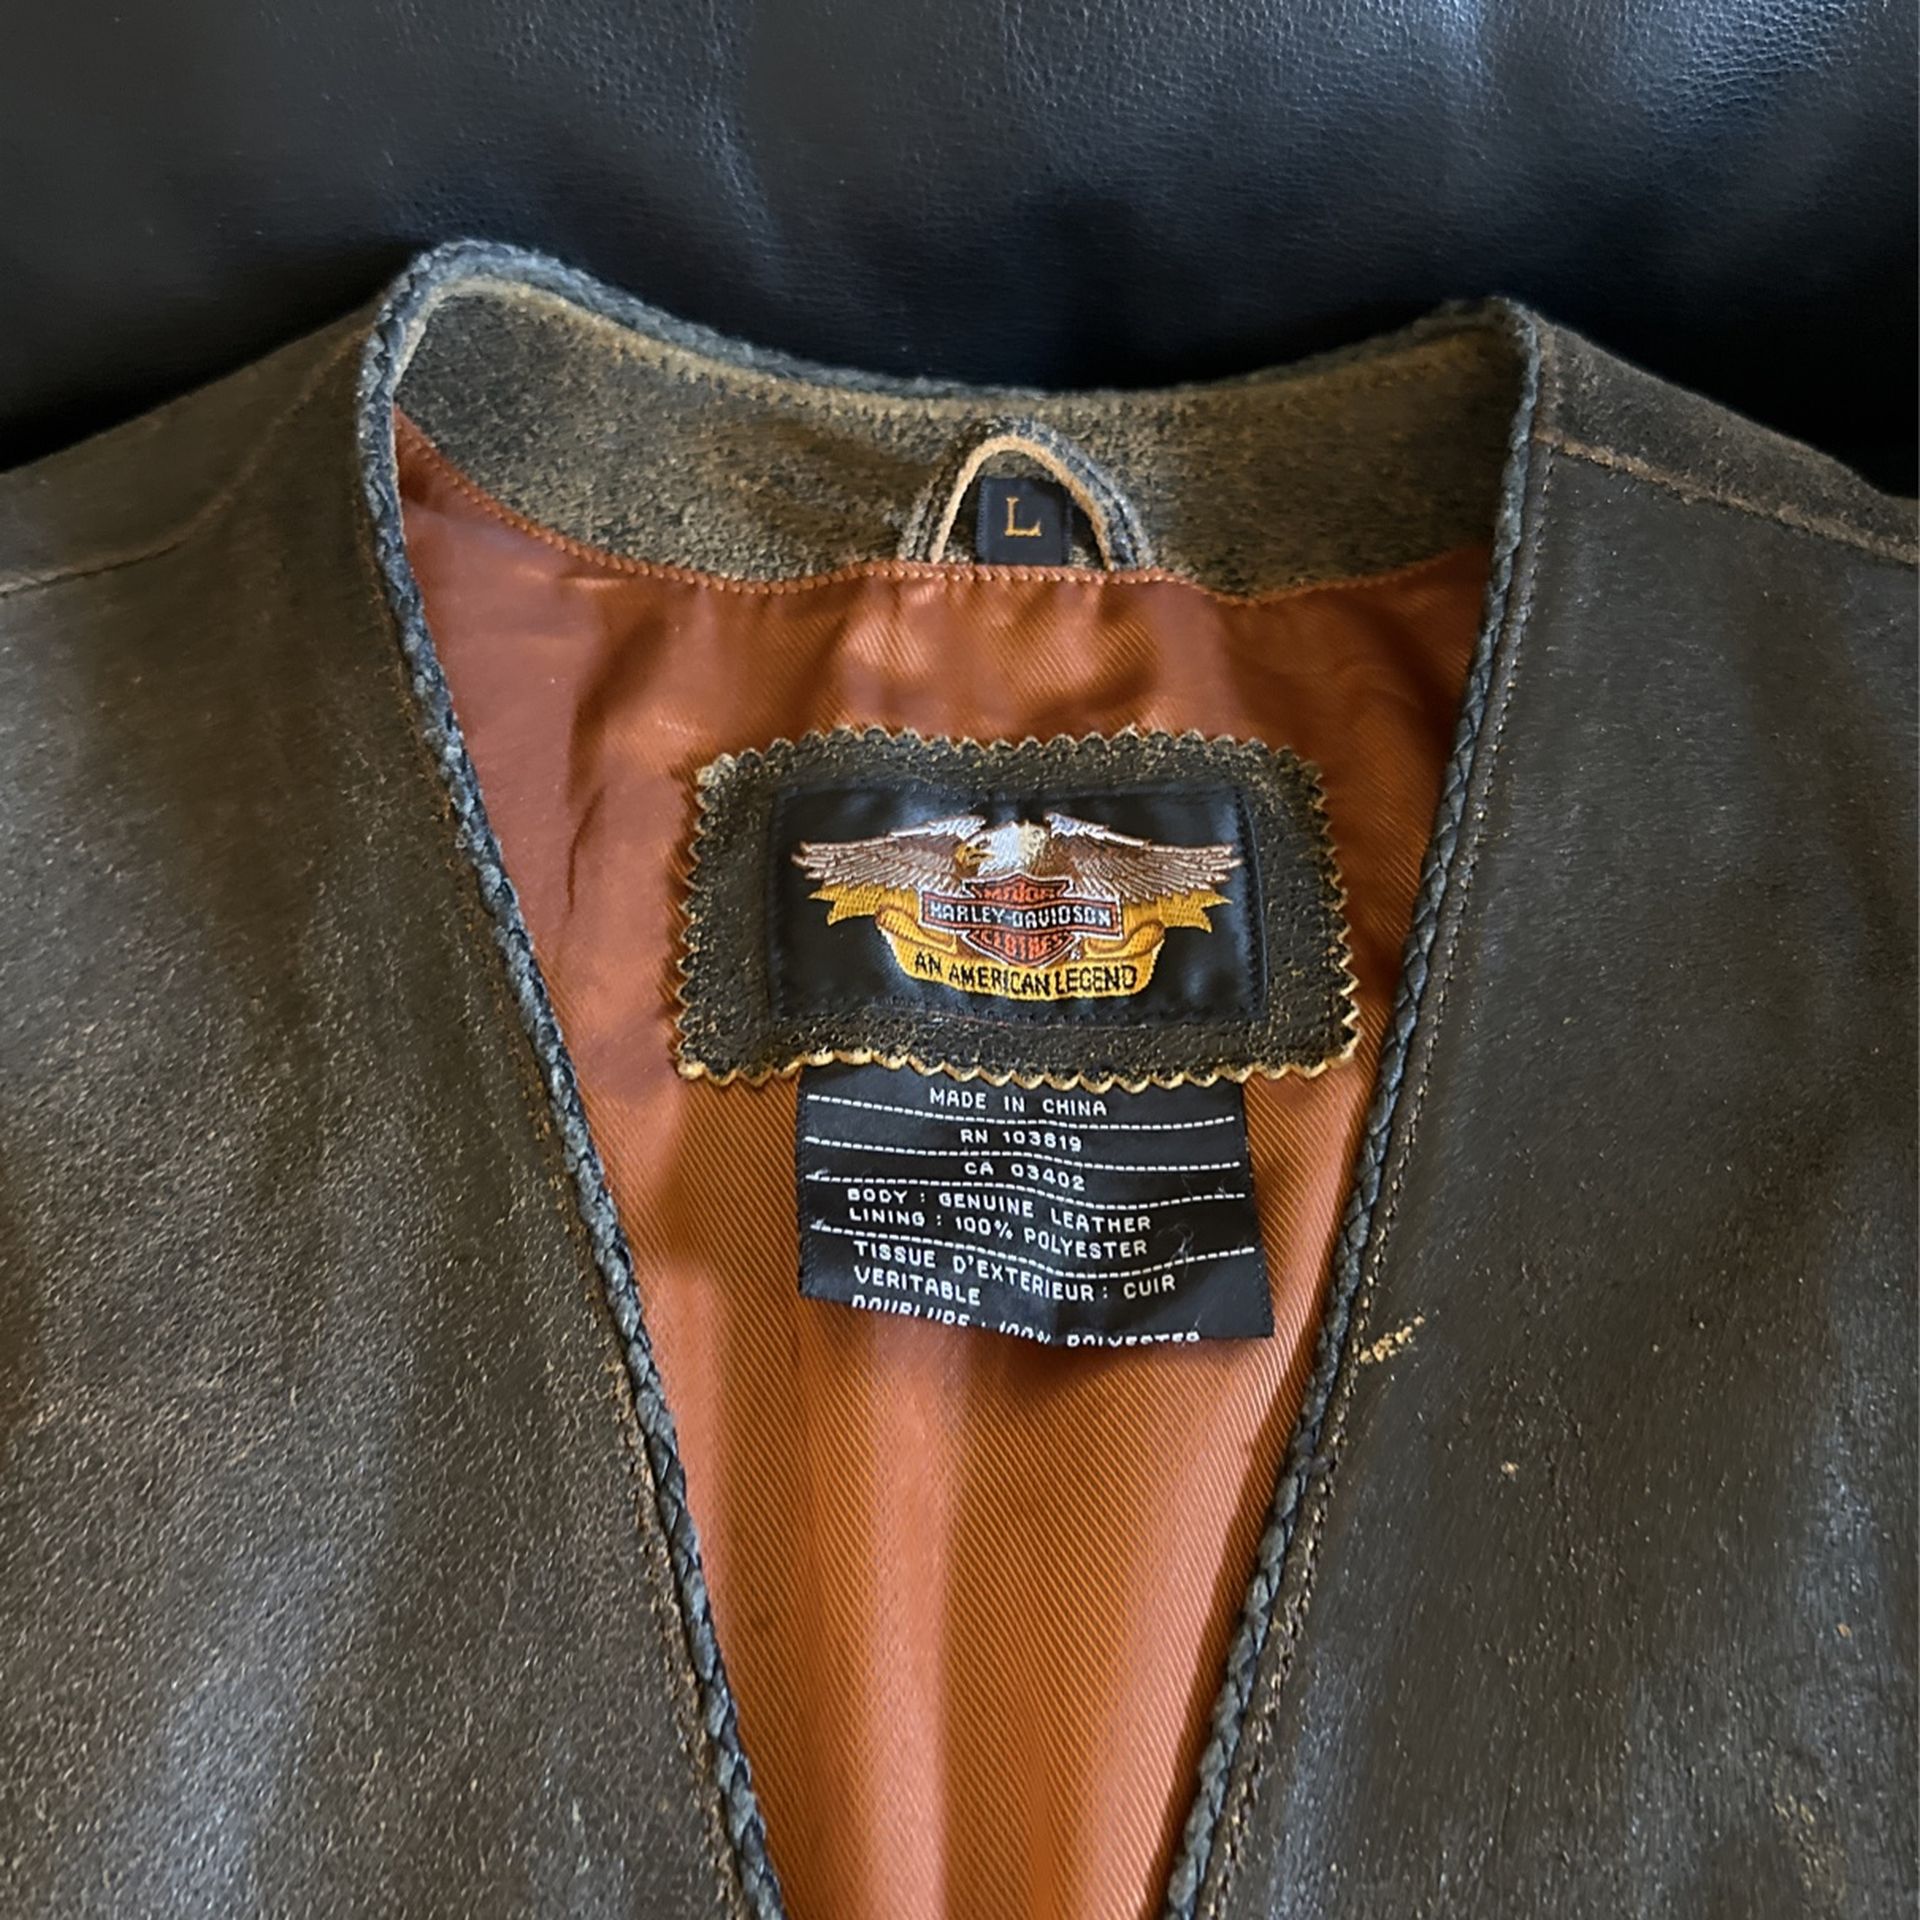 New With No Tags Harley Davidson Leather Vest